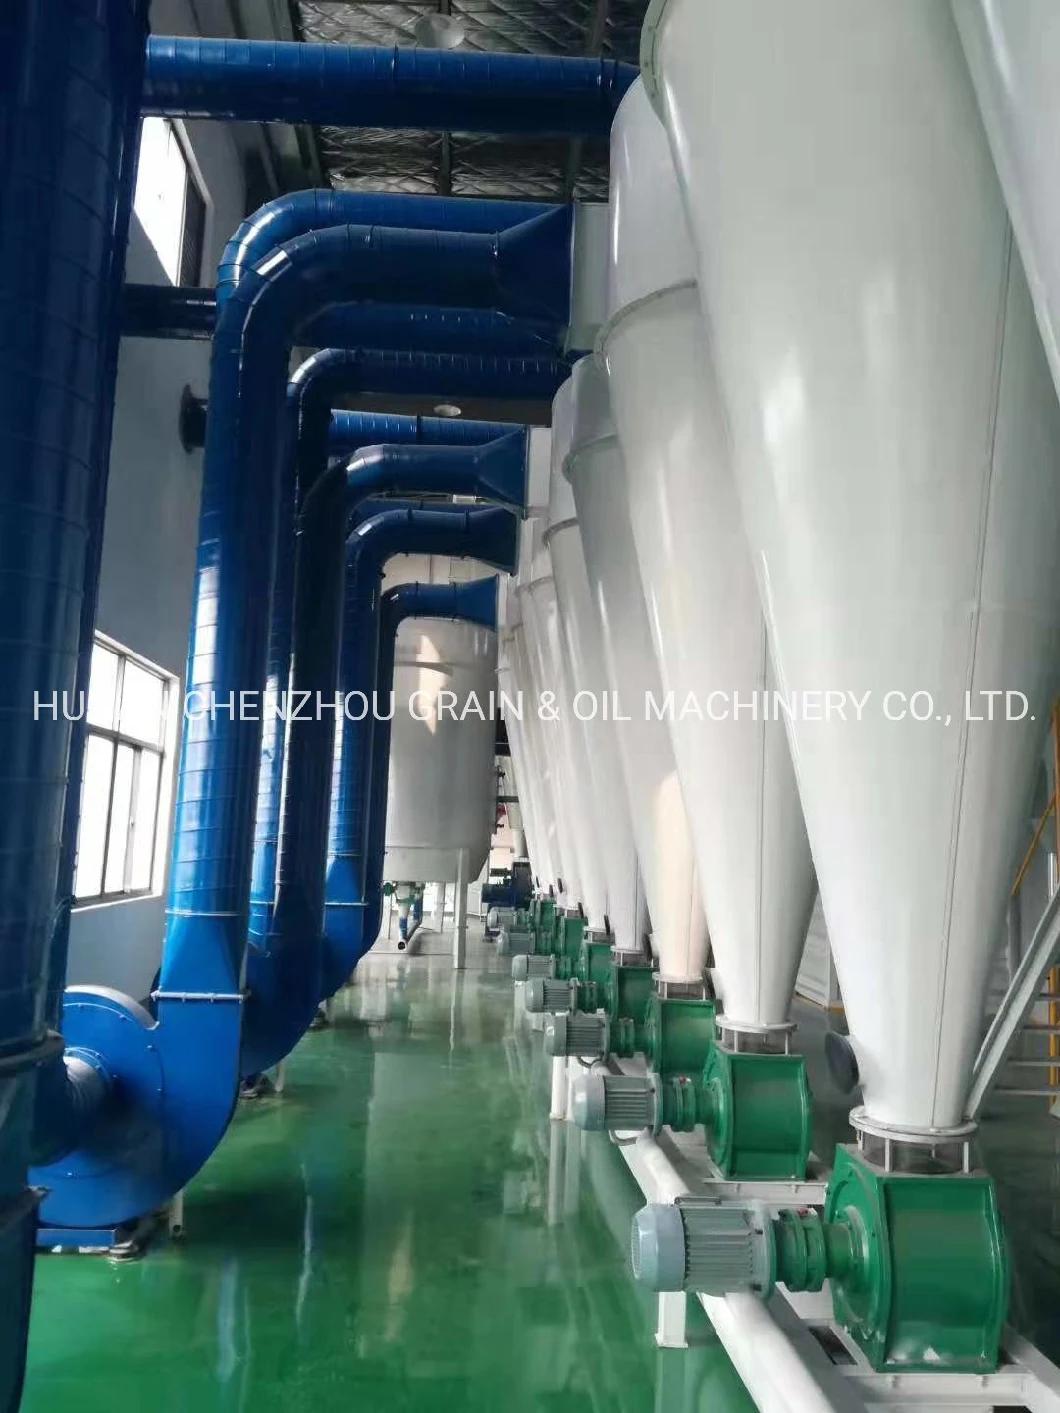 Cool Silos for Rice Mill Rcie Paddy Brown Rice Storage